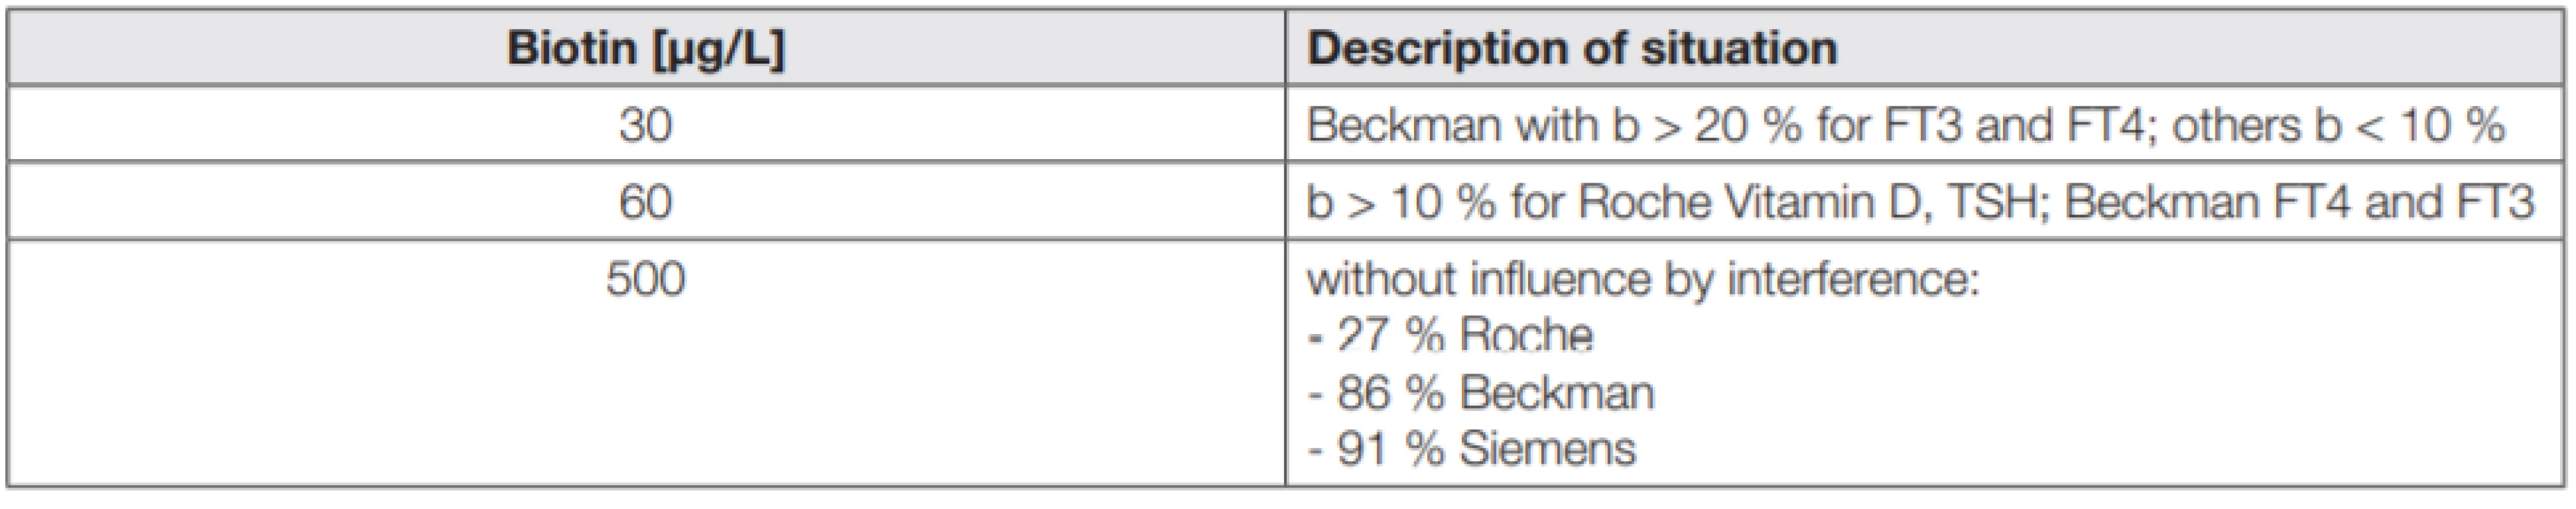 Dependency of biotin interference on seven analytes (FT4, FT3, TSH, vitamin D, CA 19-9, folate, testosterone and
three measurement platforms (Siemens, Beckman, Roche).
